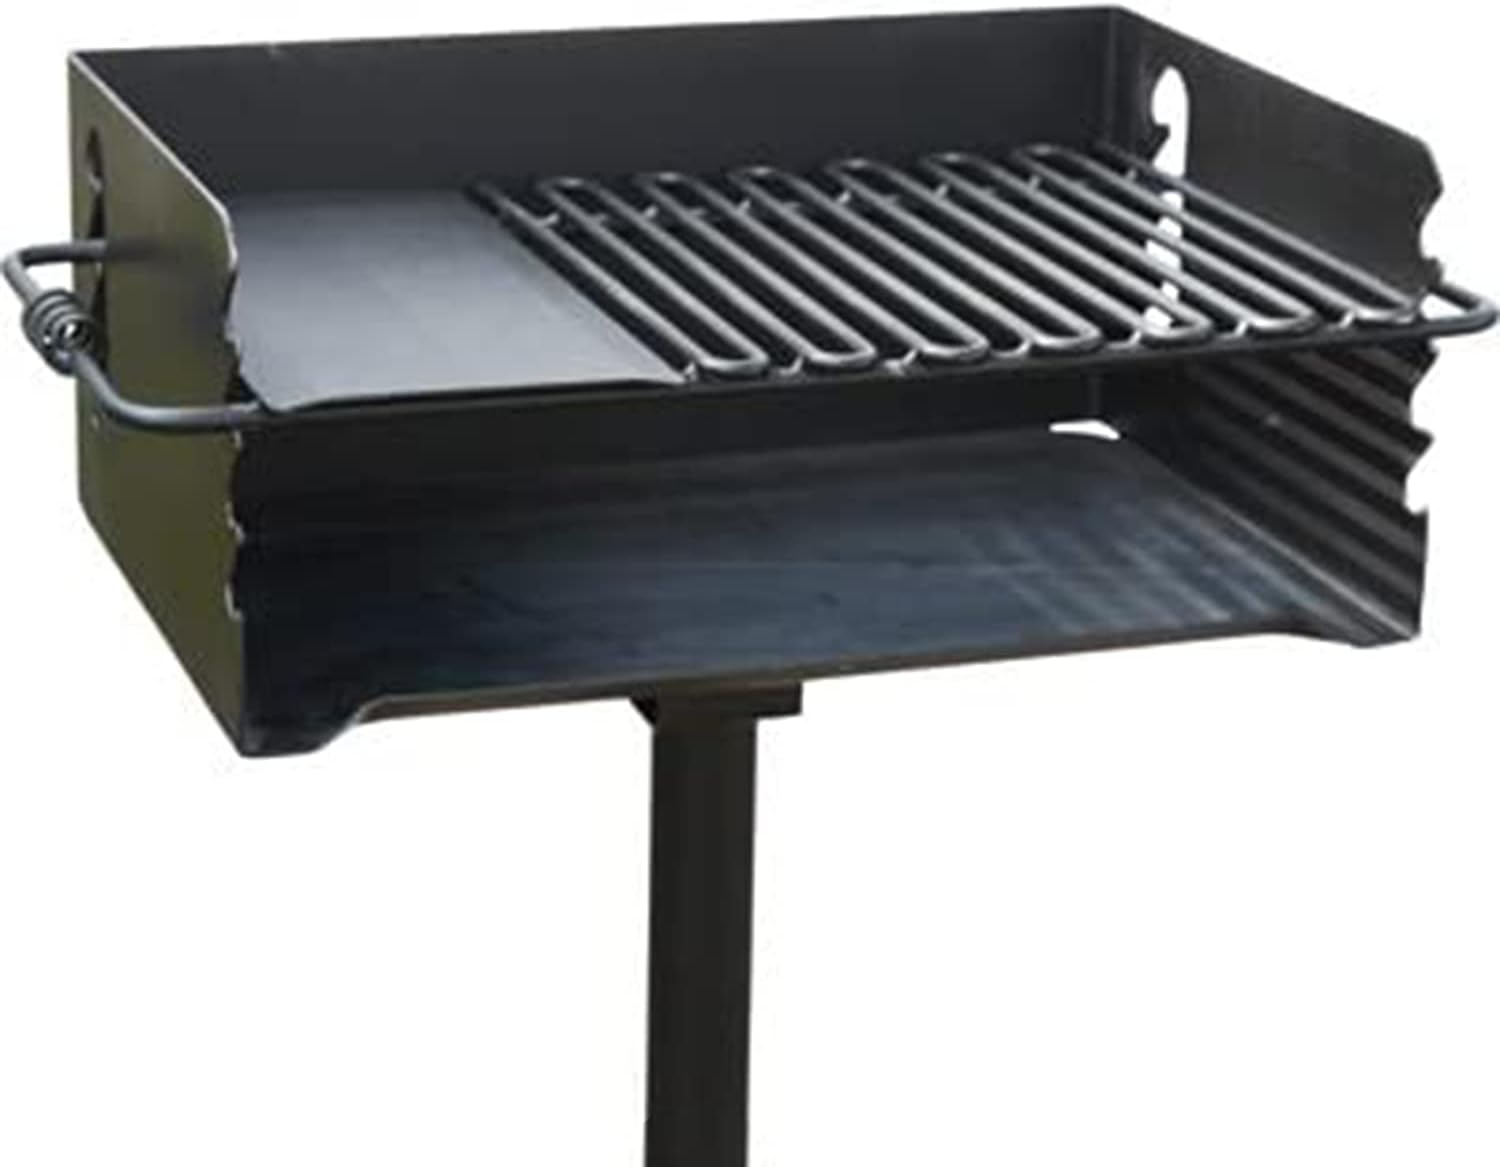 Pilot Rock CBP-247 Jumbo Park Style Heavy Duty Steel Outdoor BBQ Charcoal Grill with Cooking Grate and 2 Piece Post for Camping and Backyards, Black - Barbecue Whizz...Watch My Smoke!